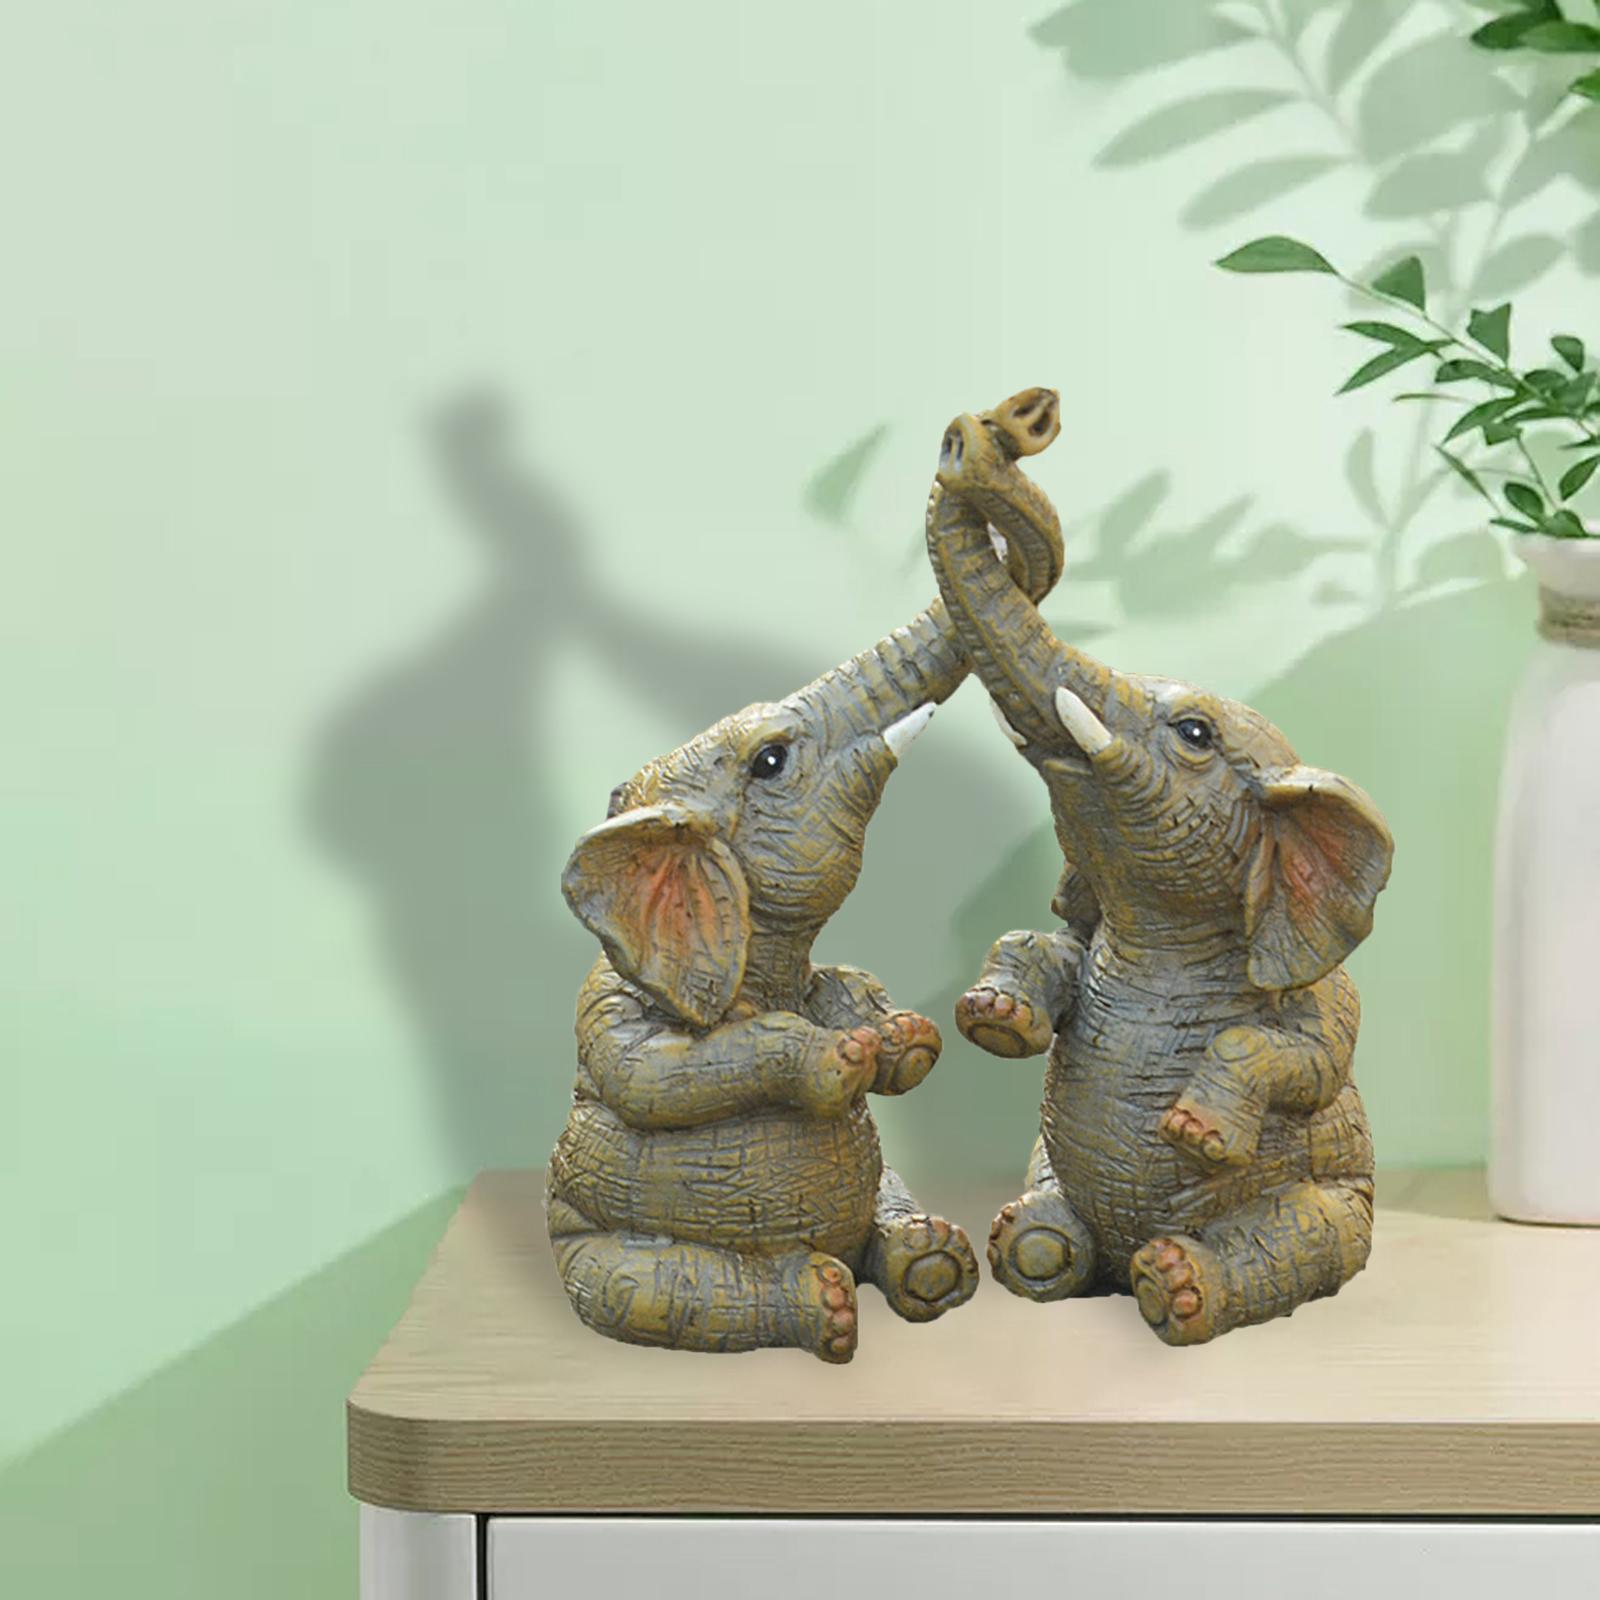 Couple Elephant Statue Sculptures Figurines Art Craft for Table Room Display